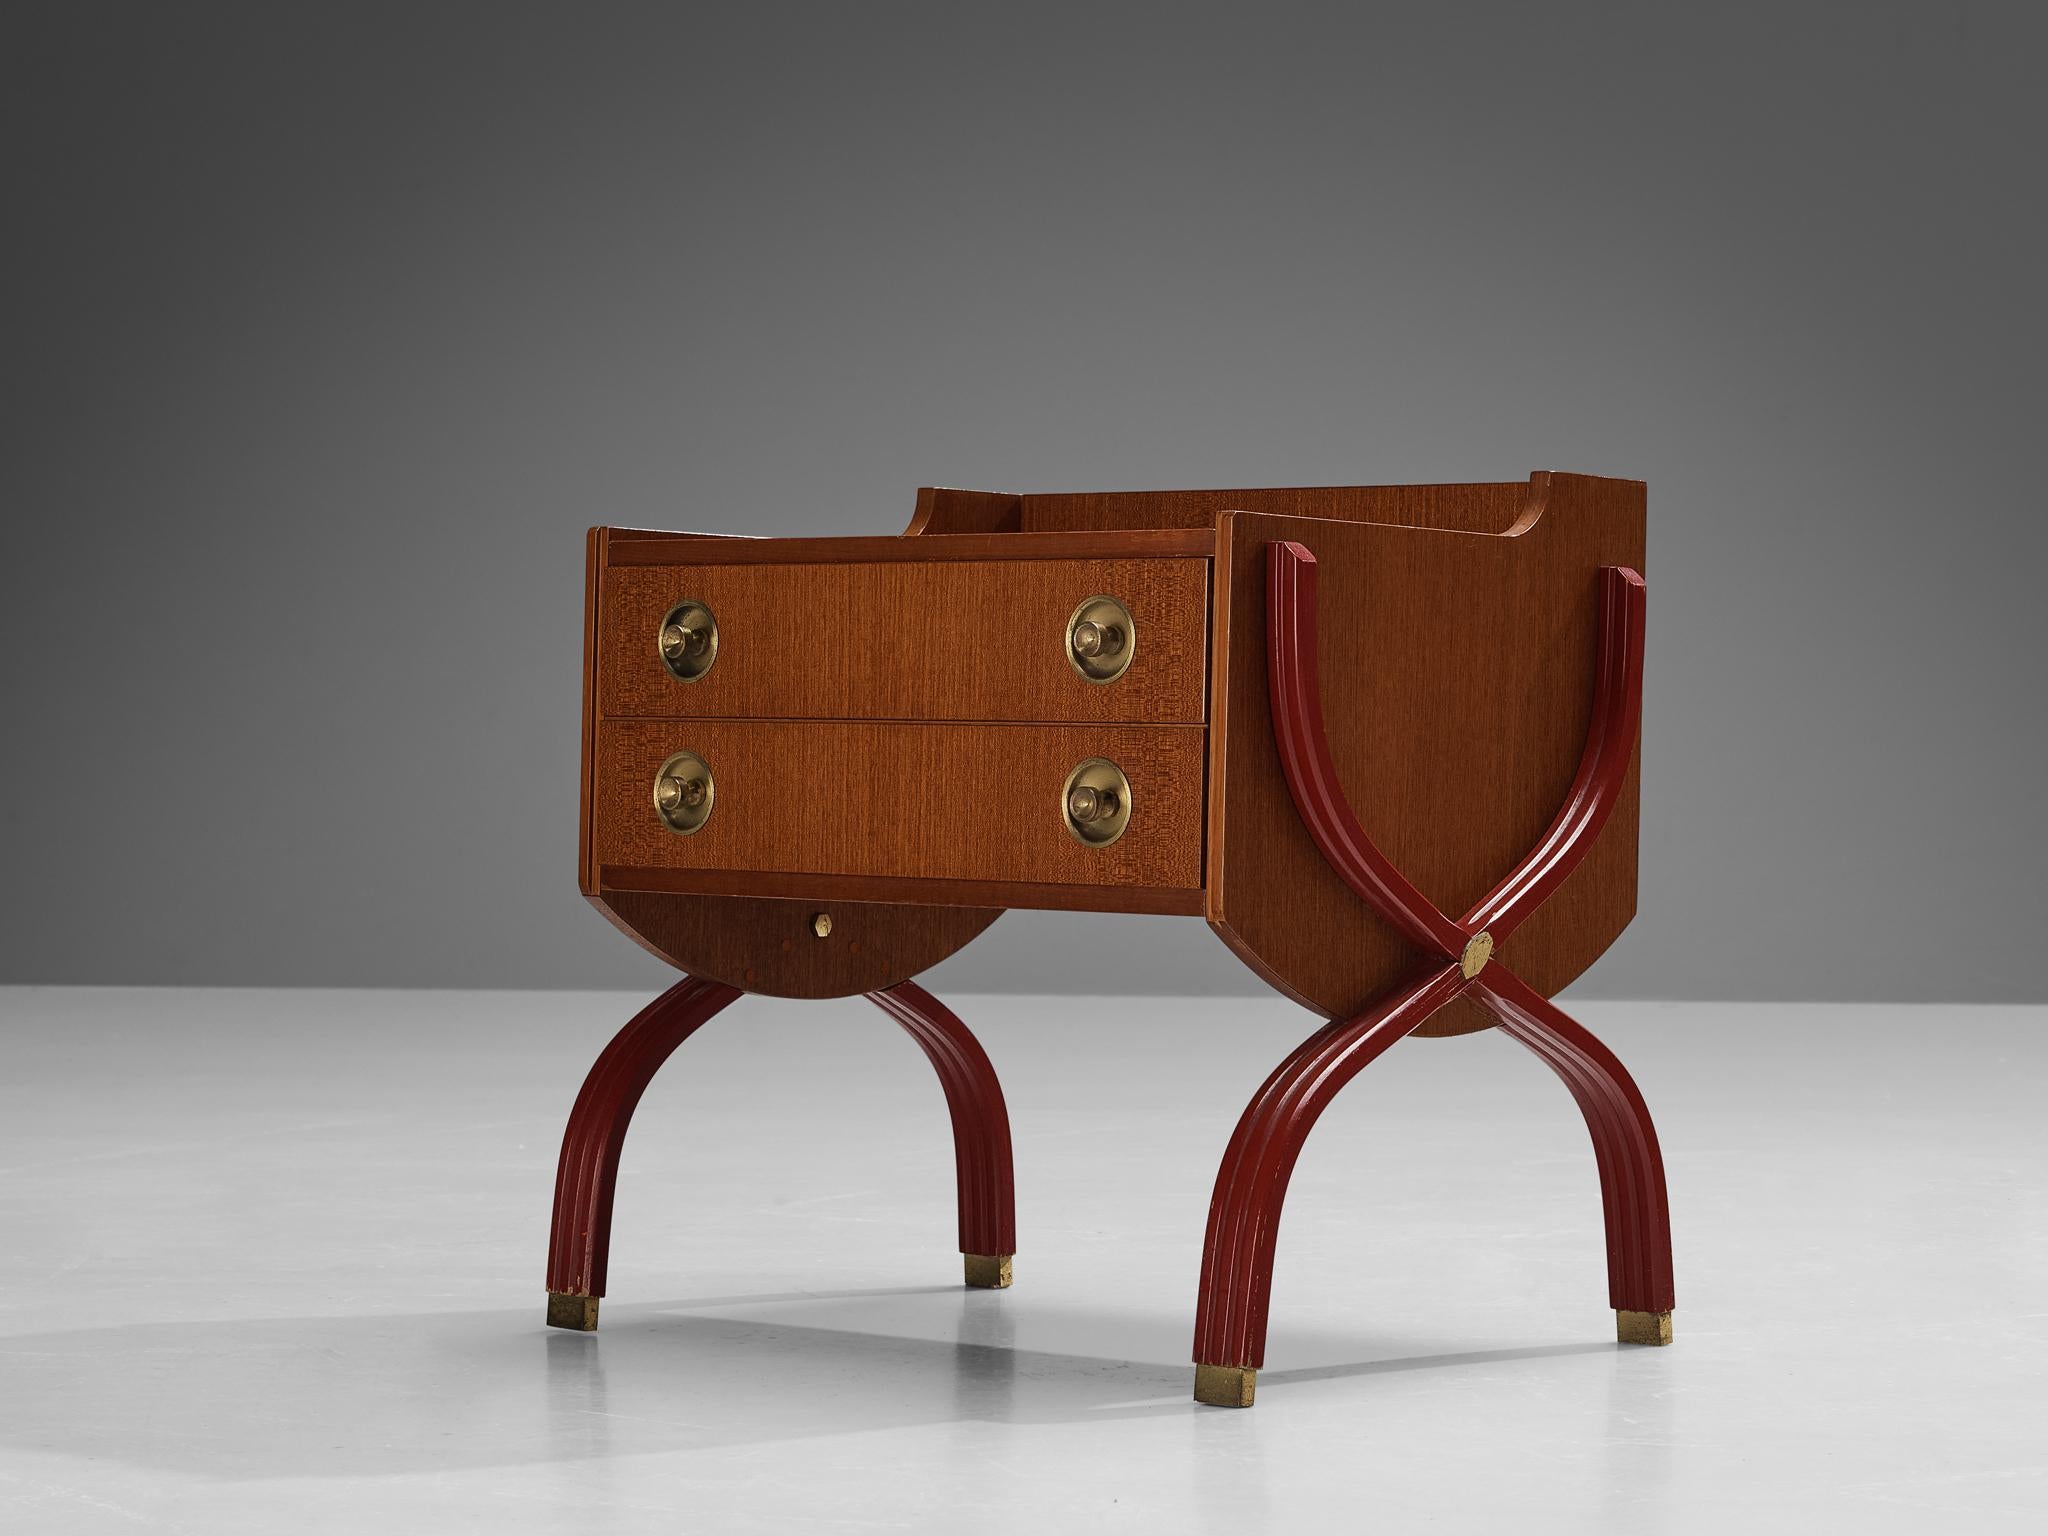  Tosi Arredamenti Pair of Cabinets or Night Stands in Mahogany and Brass  For Sale 3